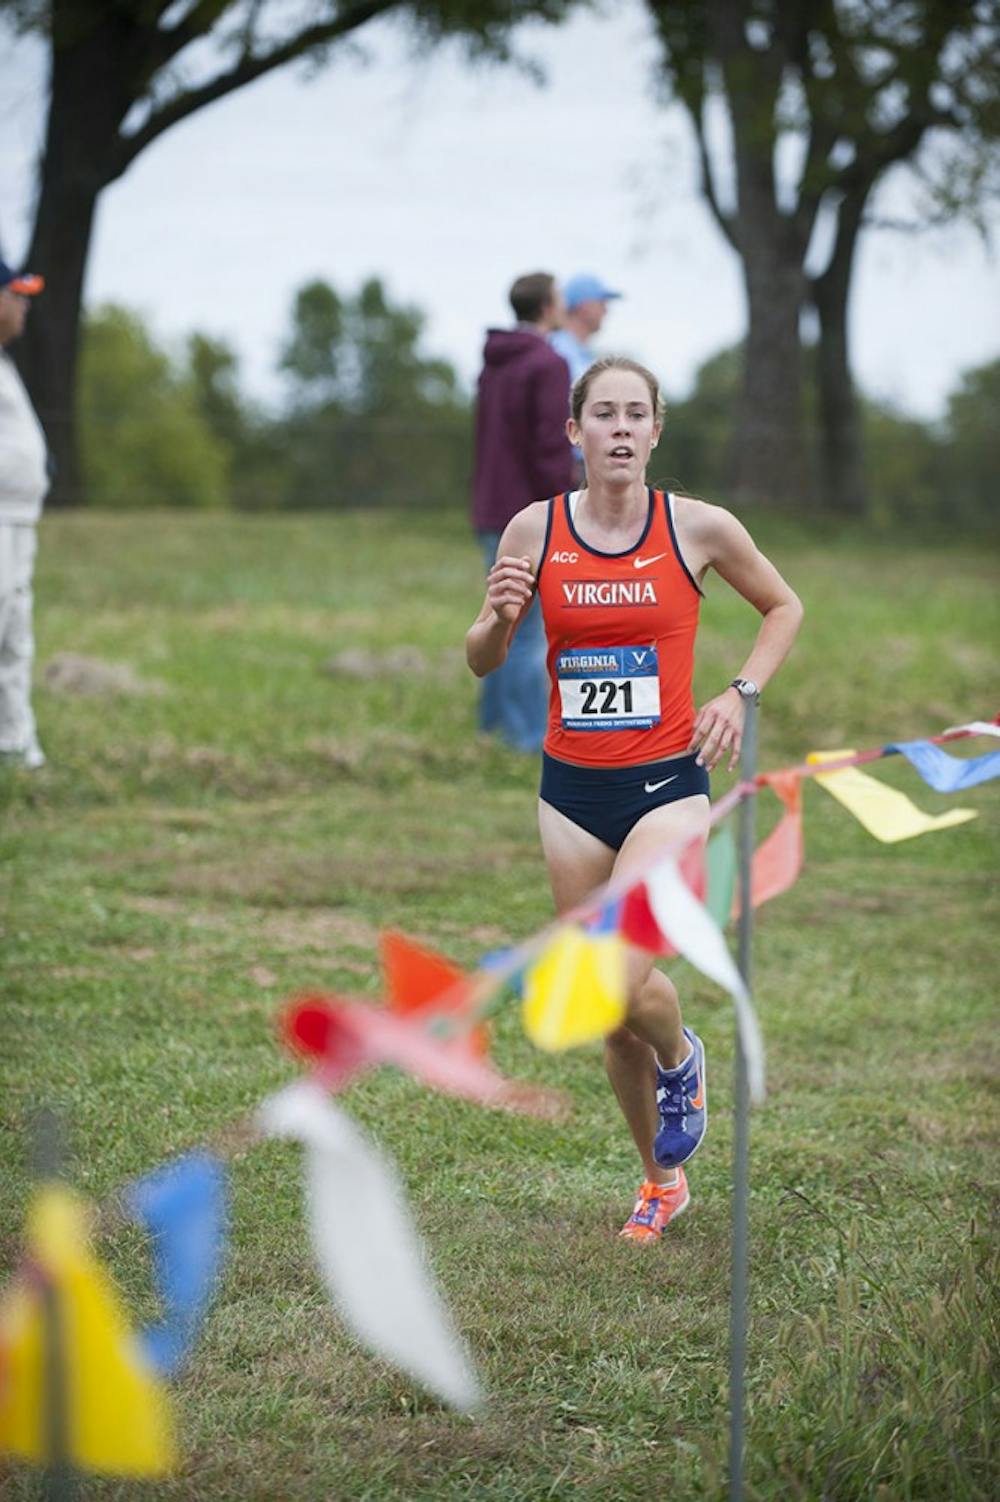 <p>Sarah Fakler finished in first place at the Virginia/Panorama Farms Invitational last Friday for her first collegiate victory as the Virginia women and men both took home team titles. </p>